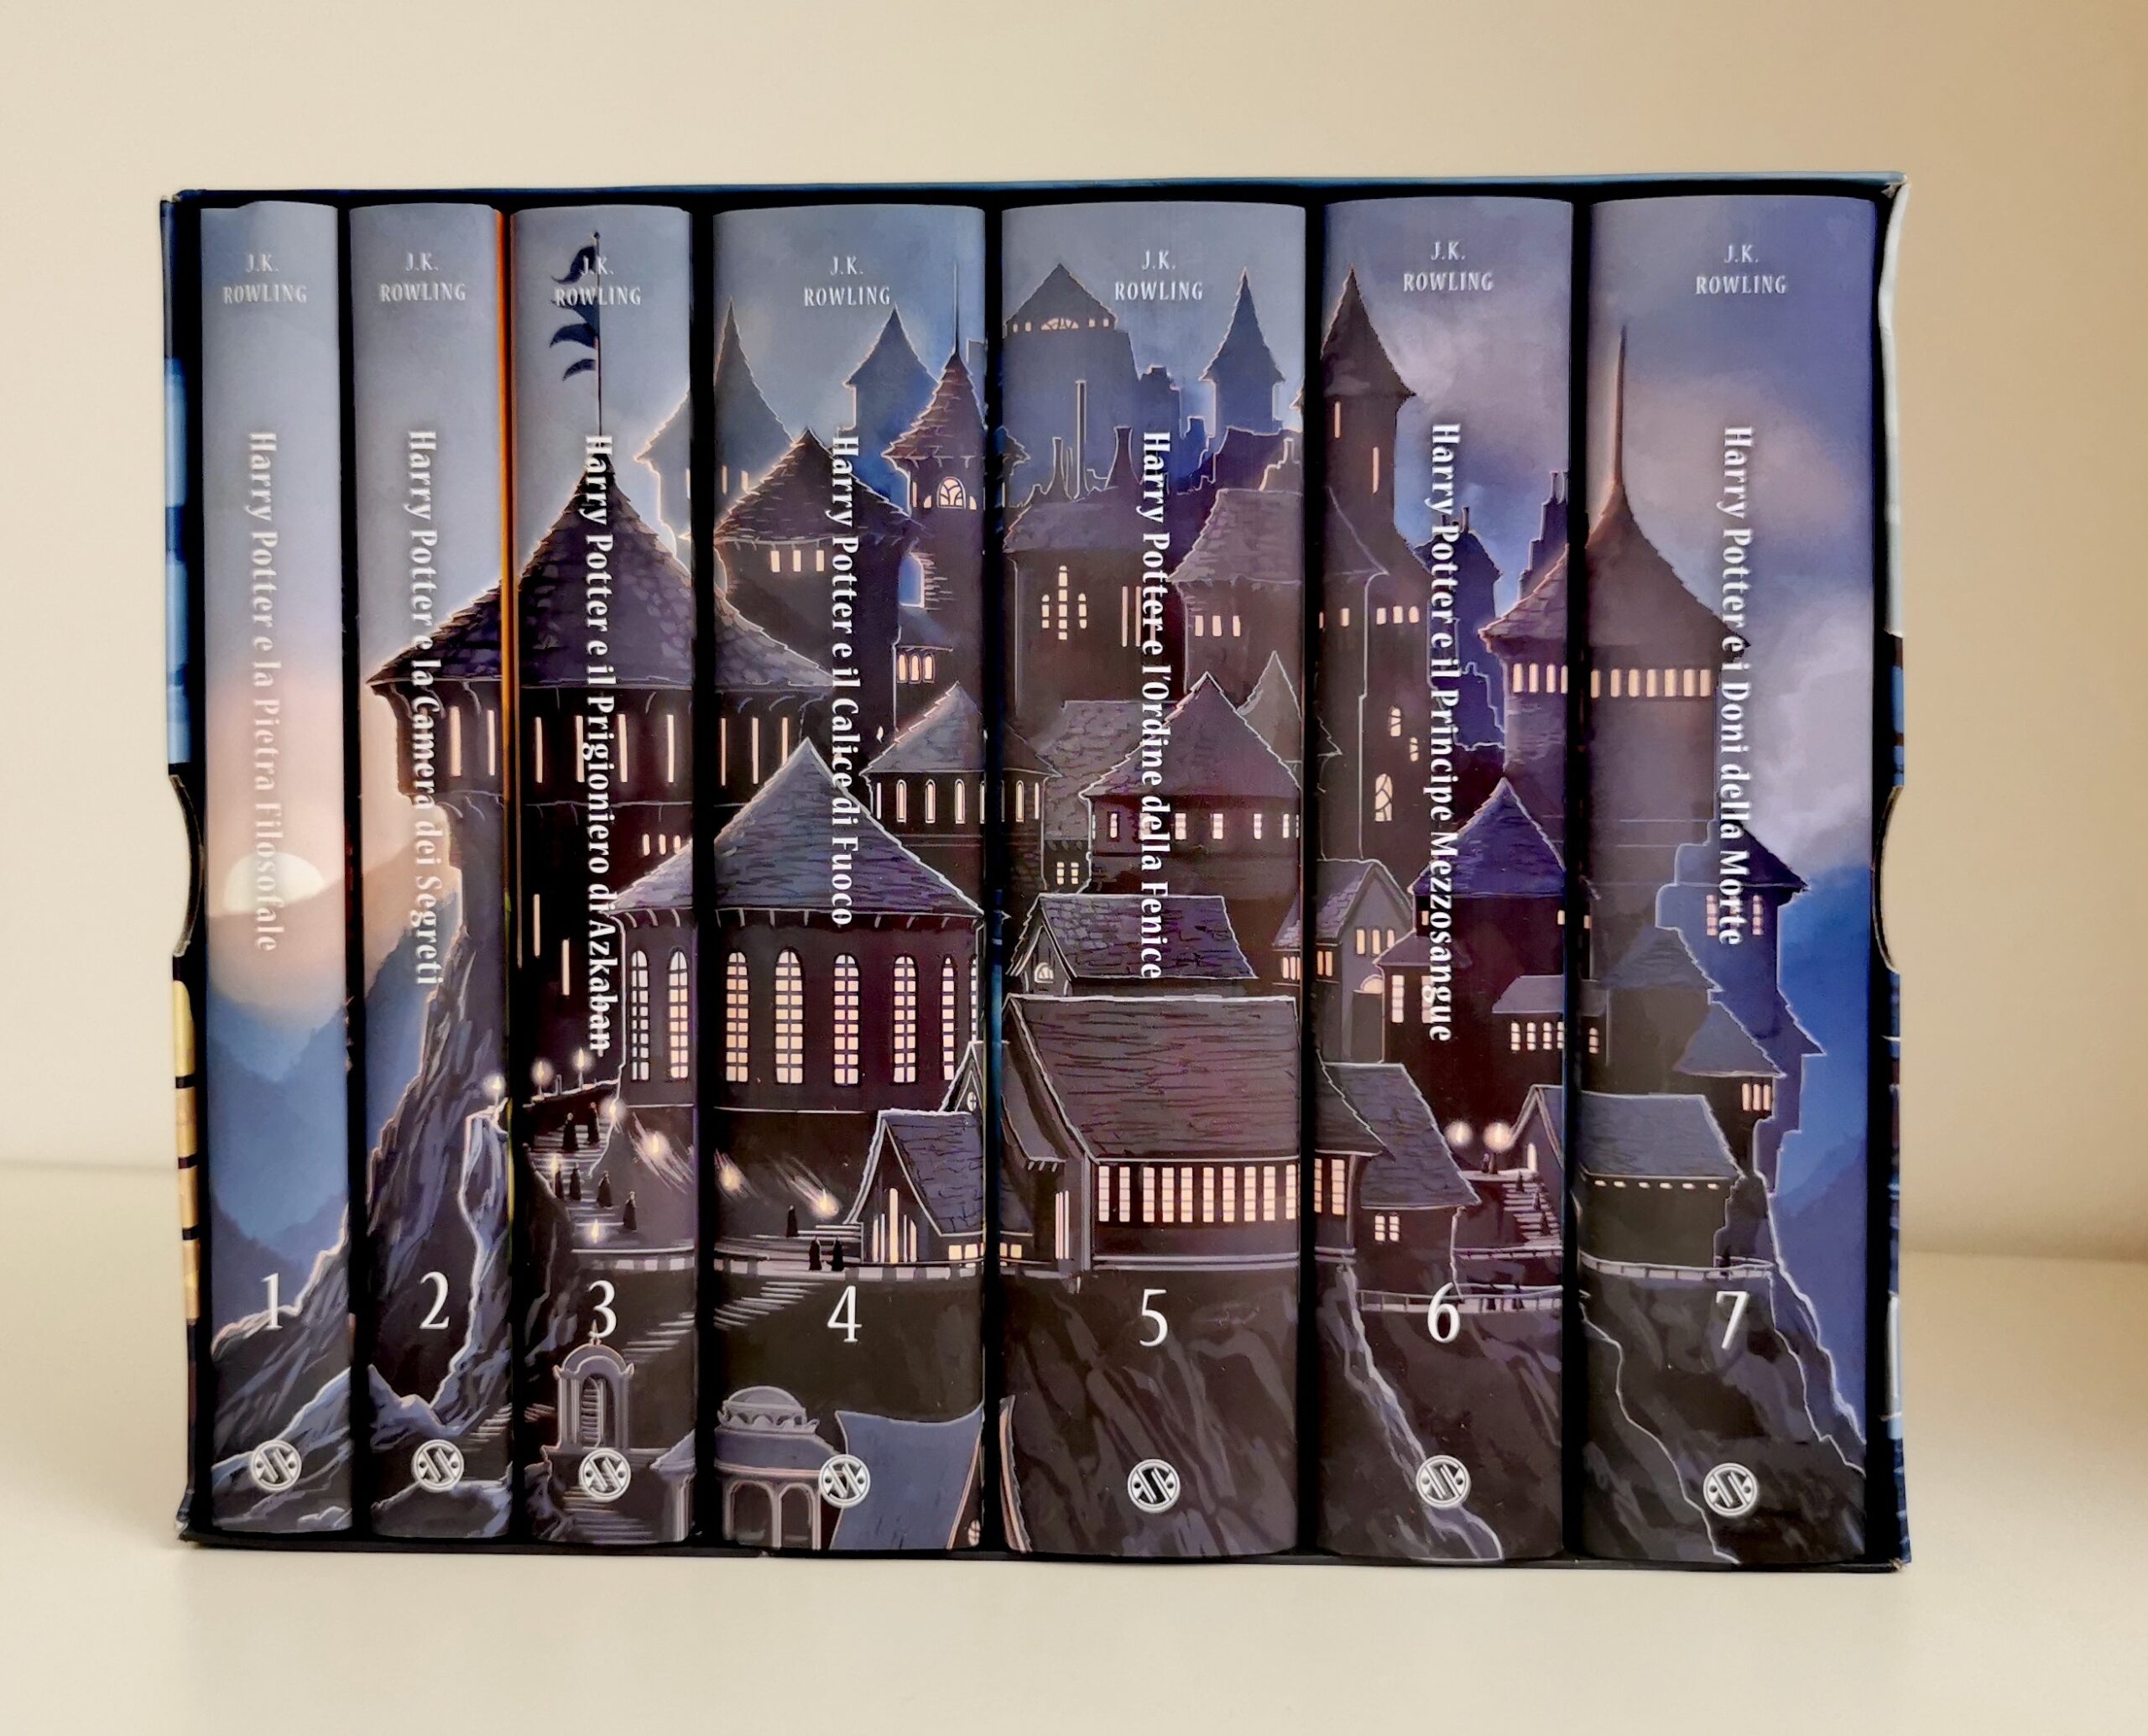 https://voltapagina.ch/wp-content/uploads/2022/12/HARRY-POTTER-1-scaled.jpg